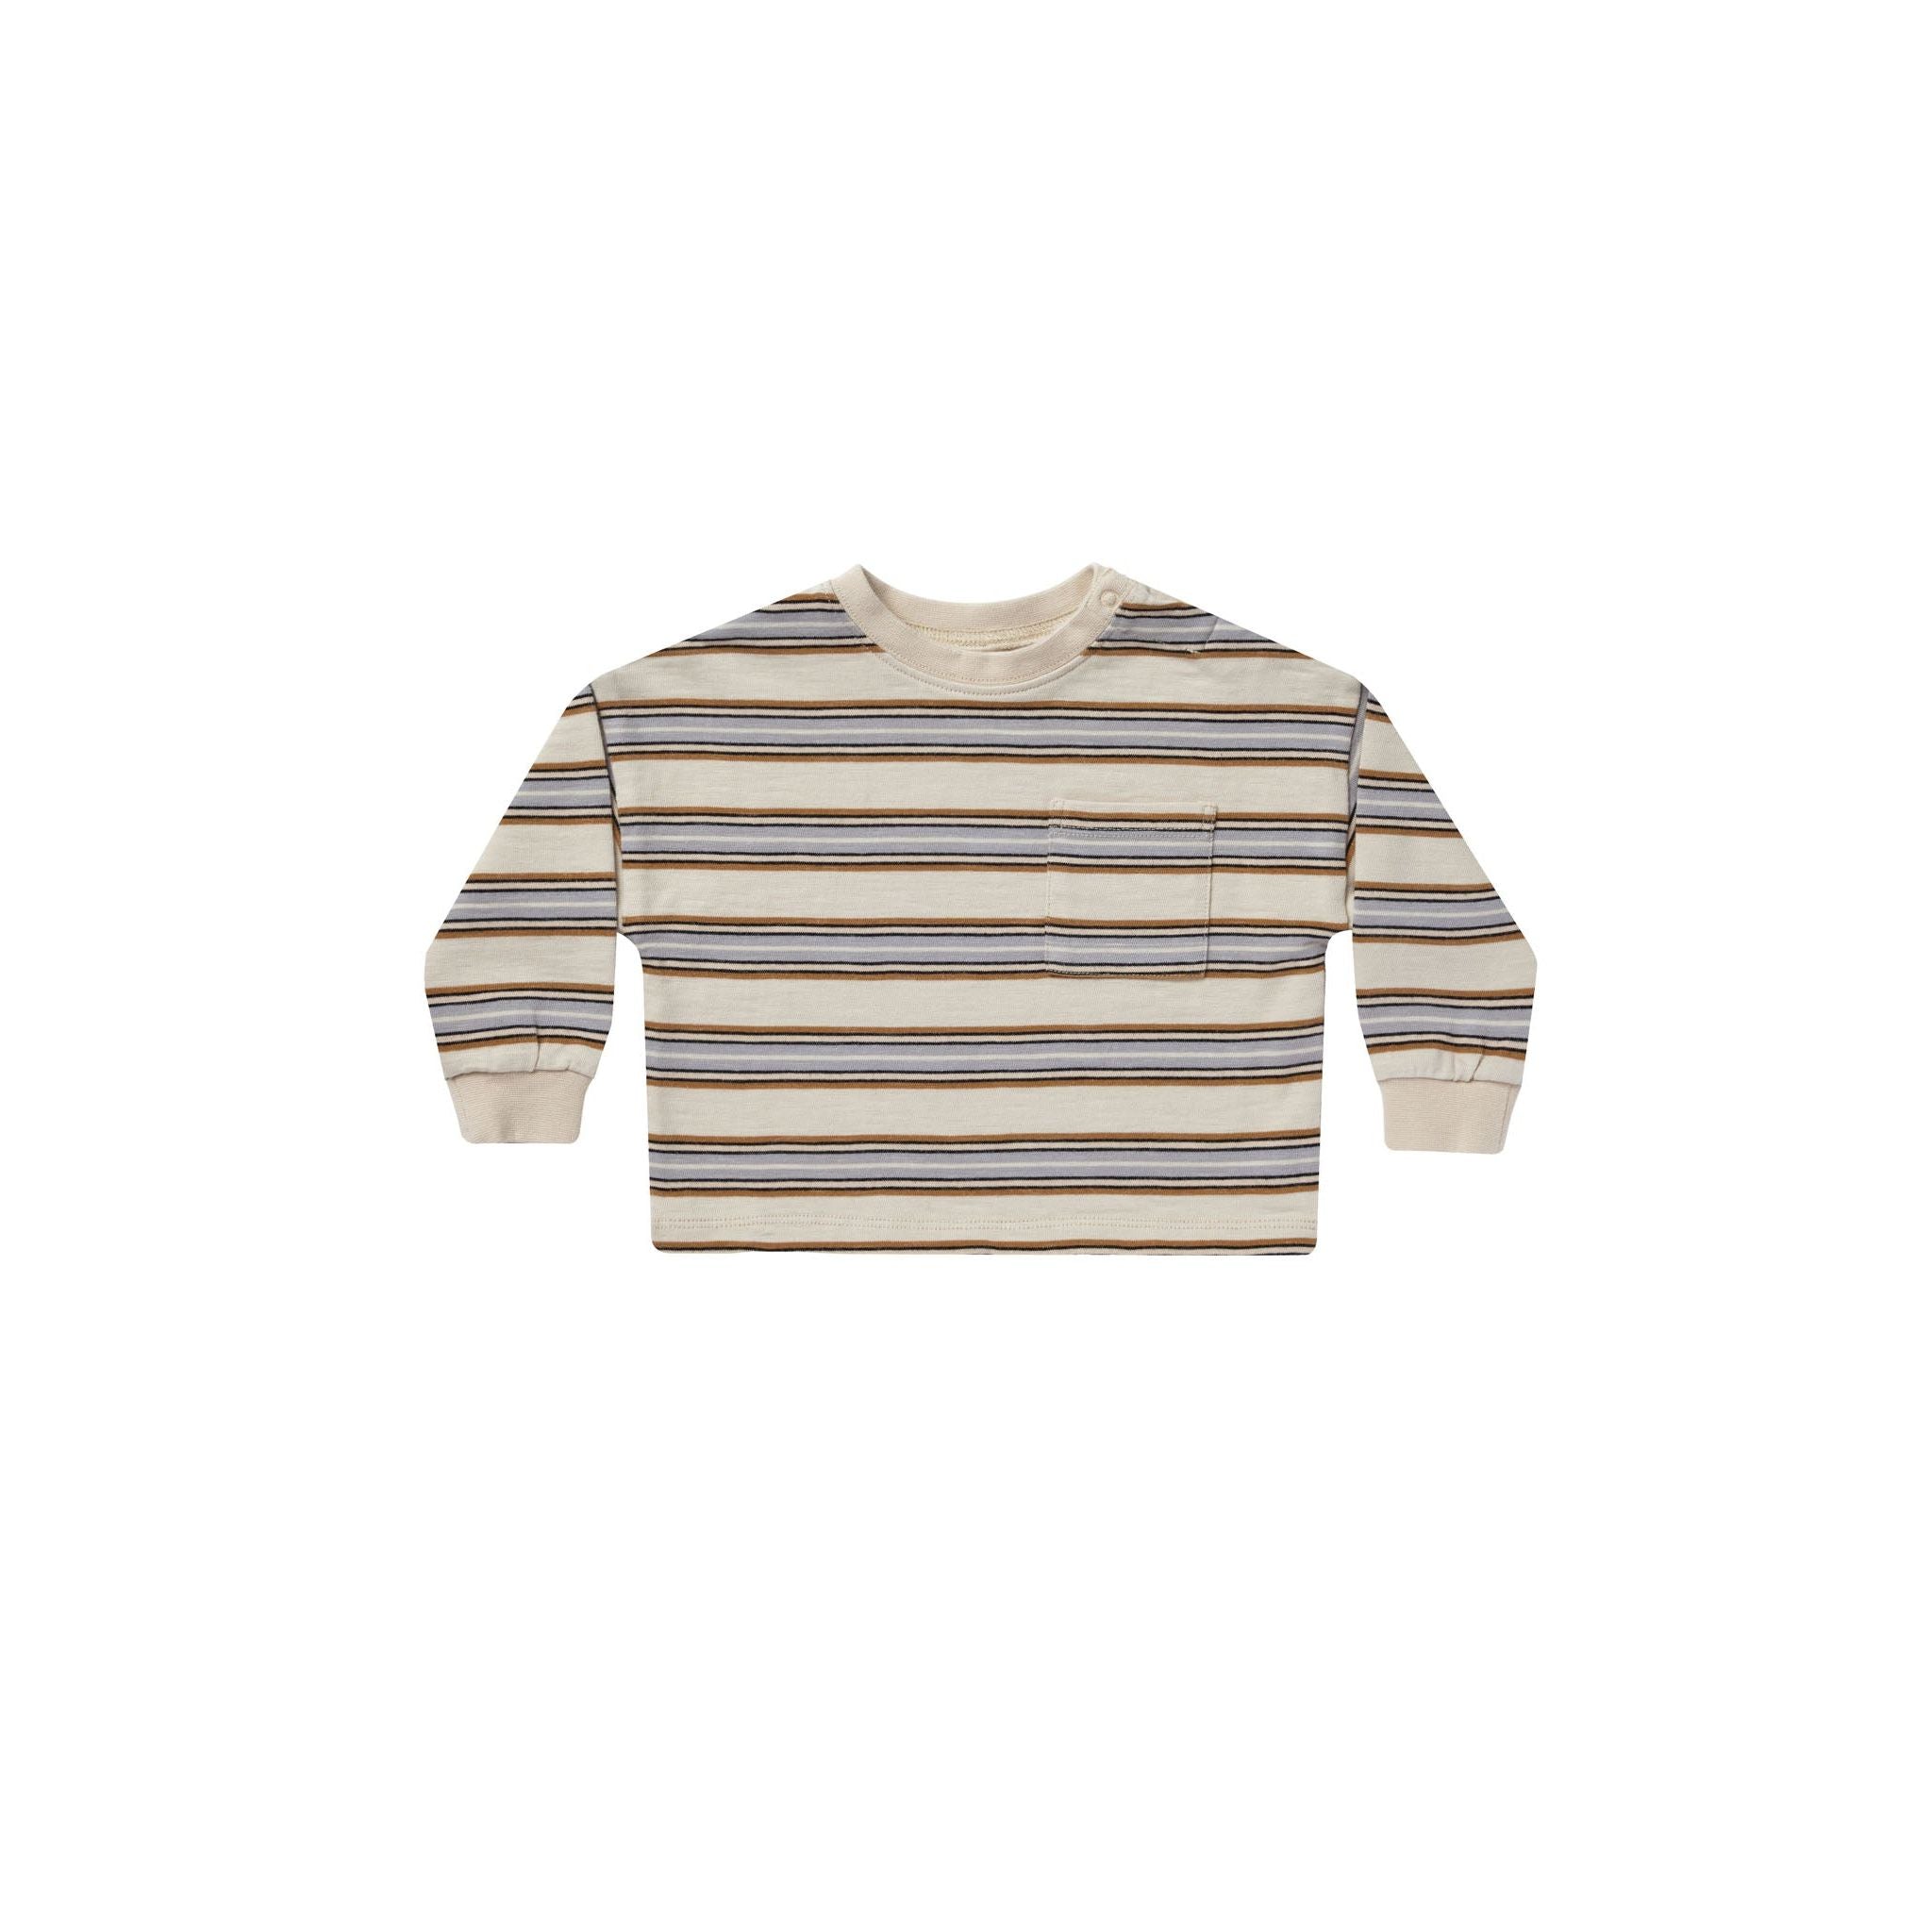 long sleeve pocket tee in ‘vintage stripe’ all-over print in brass, french blue, black, and antique on natural.